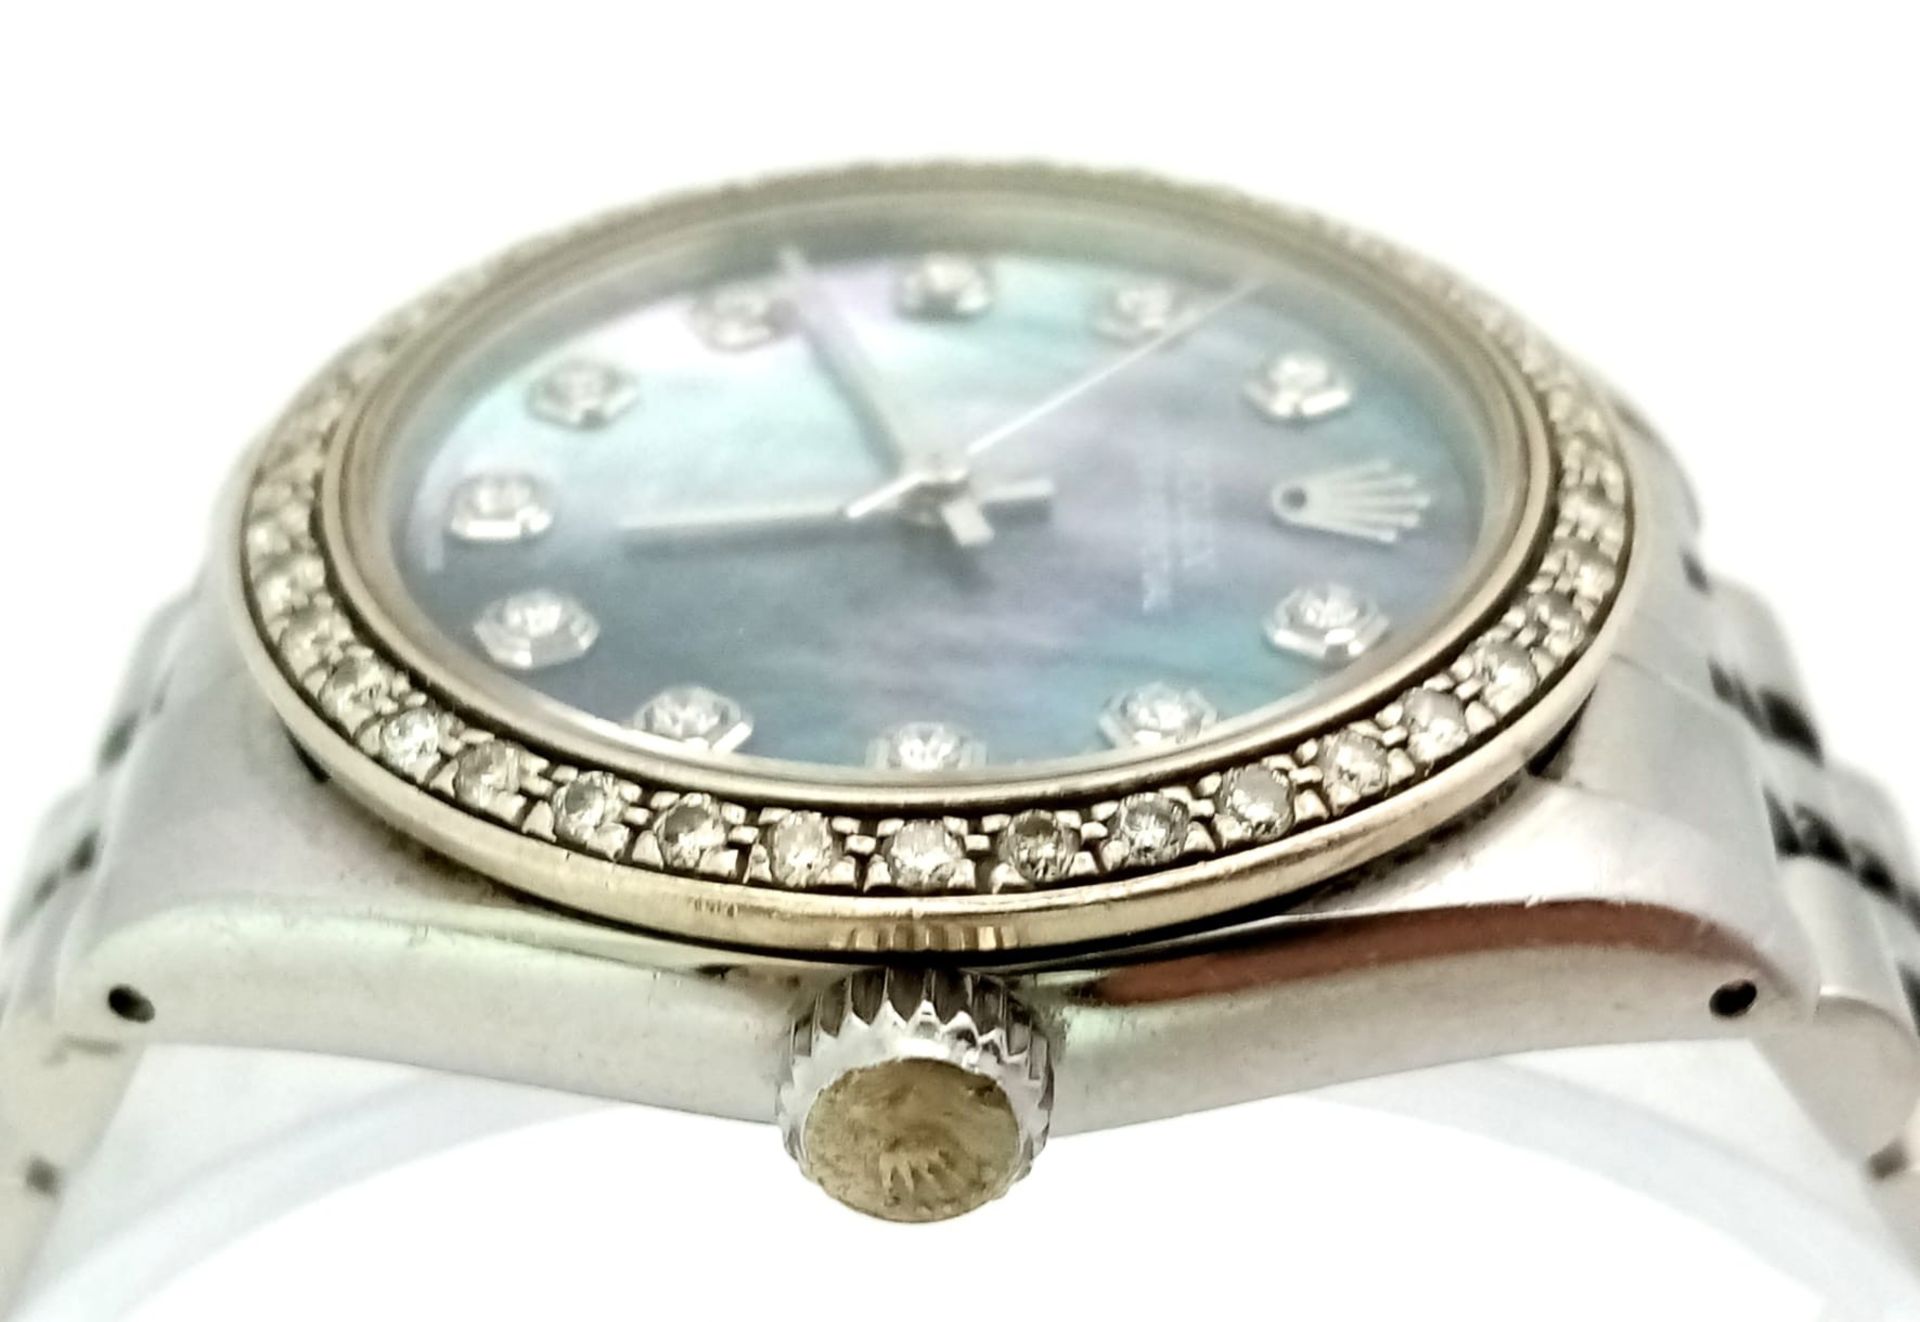 A ROLEX LADIES OYSTER PERPETUAL WRIST WATCH IN STAINLESS STEEL WITH DIAMOND BEZEL AND NUMERALS. - Image 5 of 9